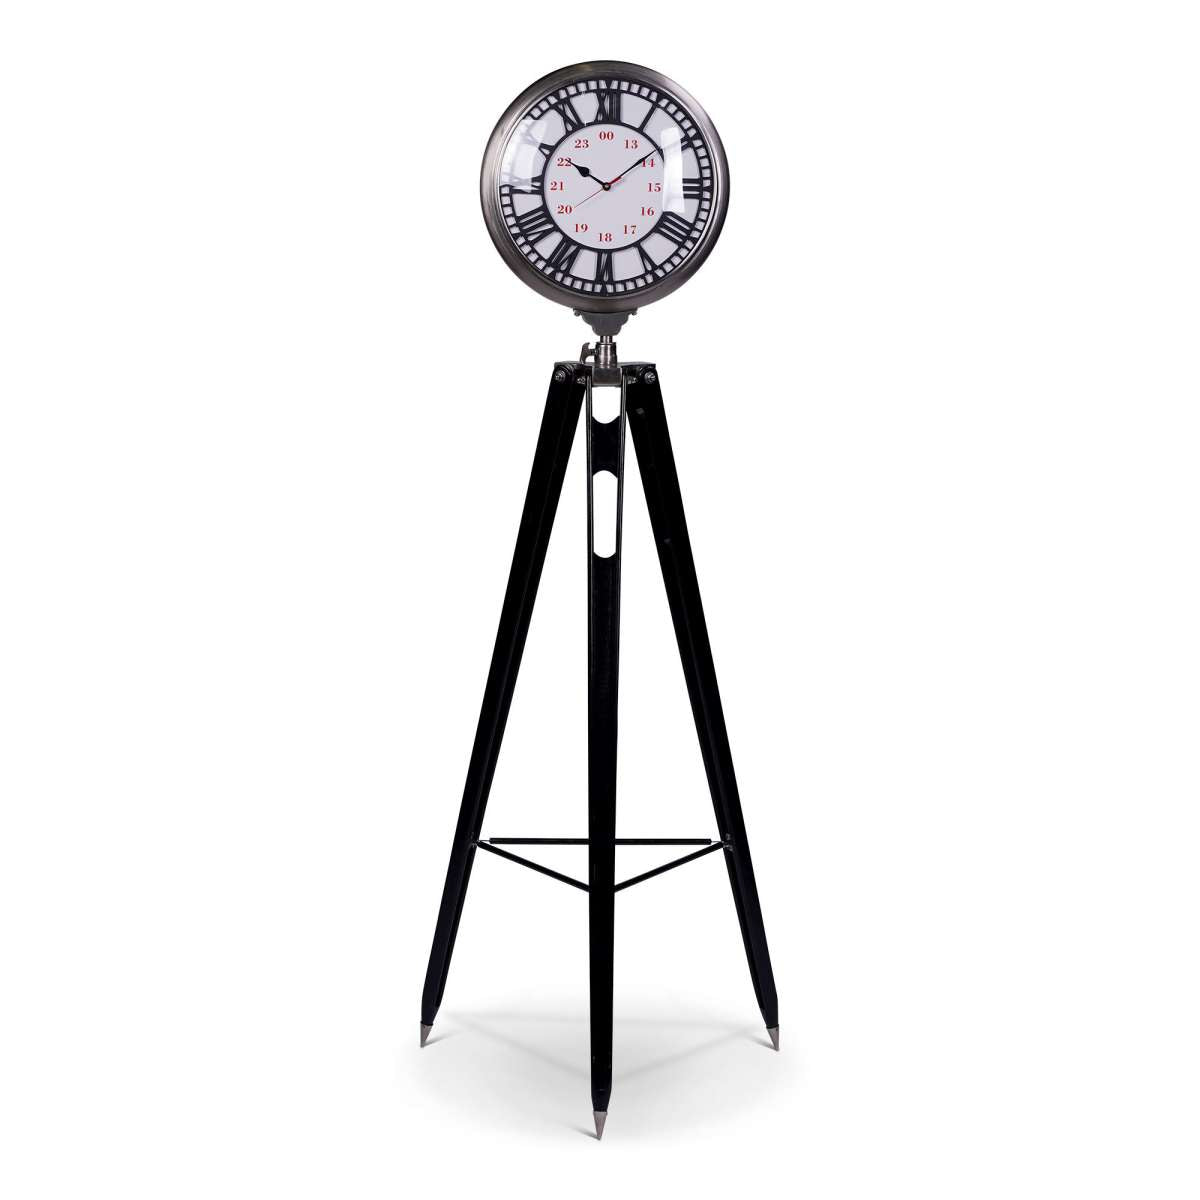 Waterloo Clock on Tripod By Authentic Models